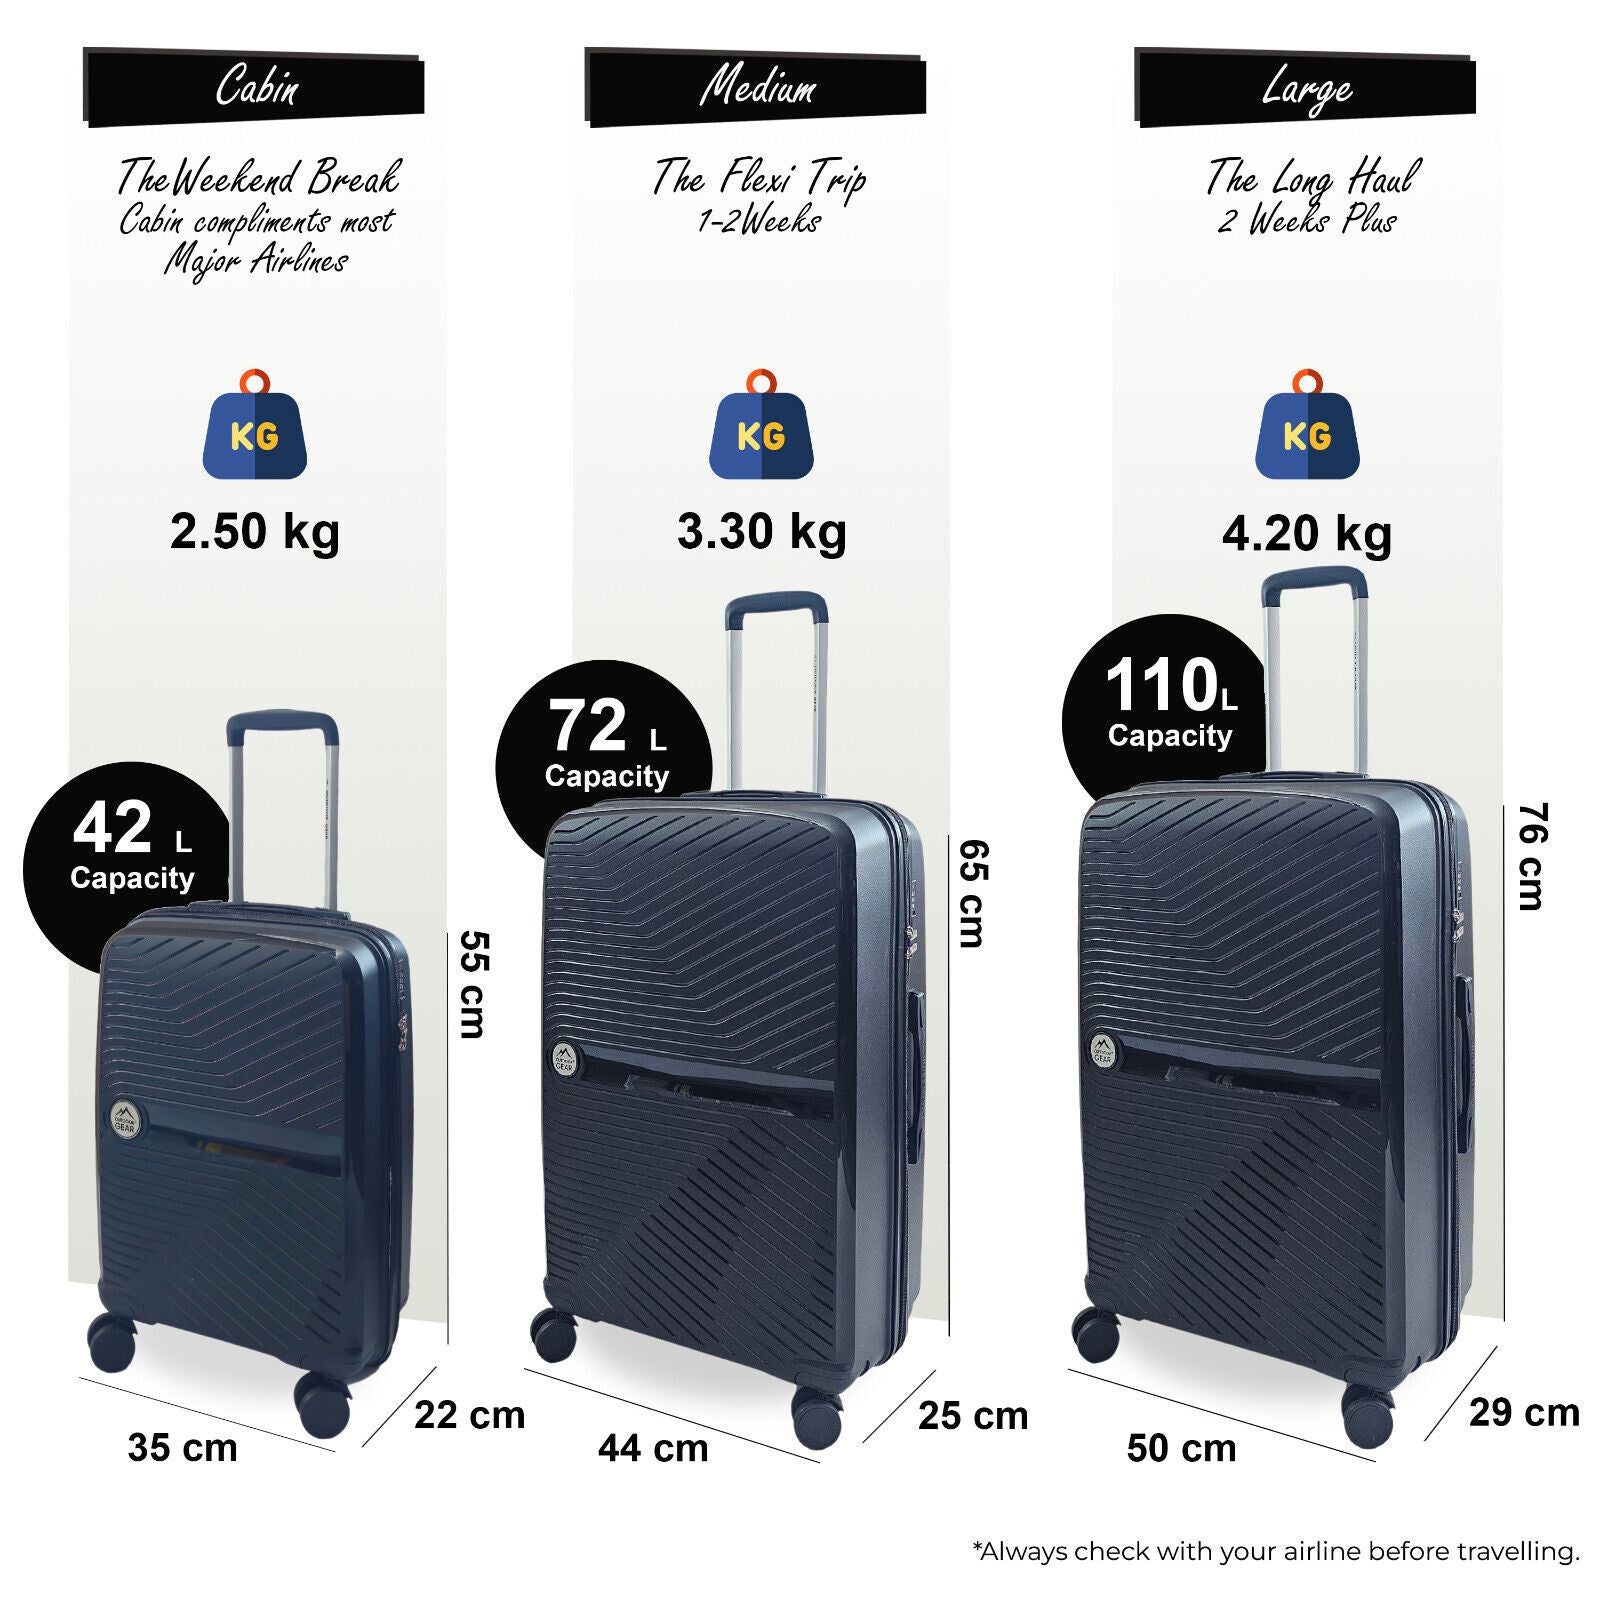 Abbeville Set of 3 Hard Shell Suitcase in Black